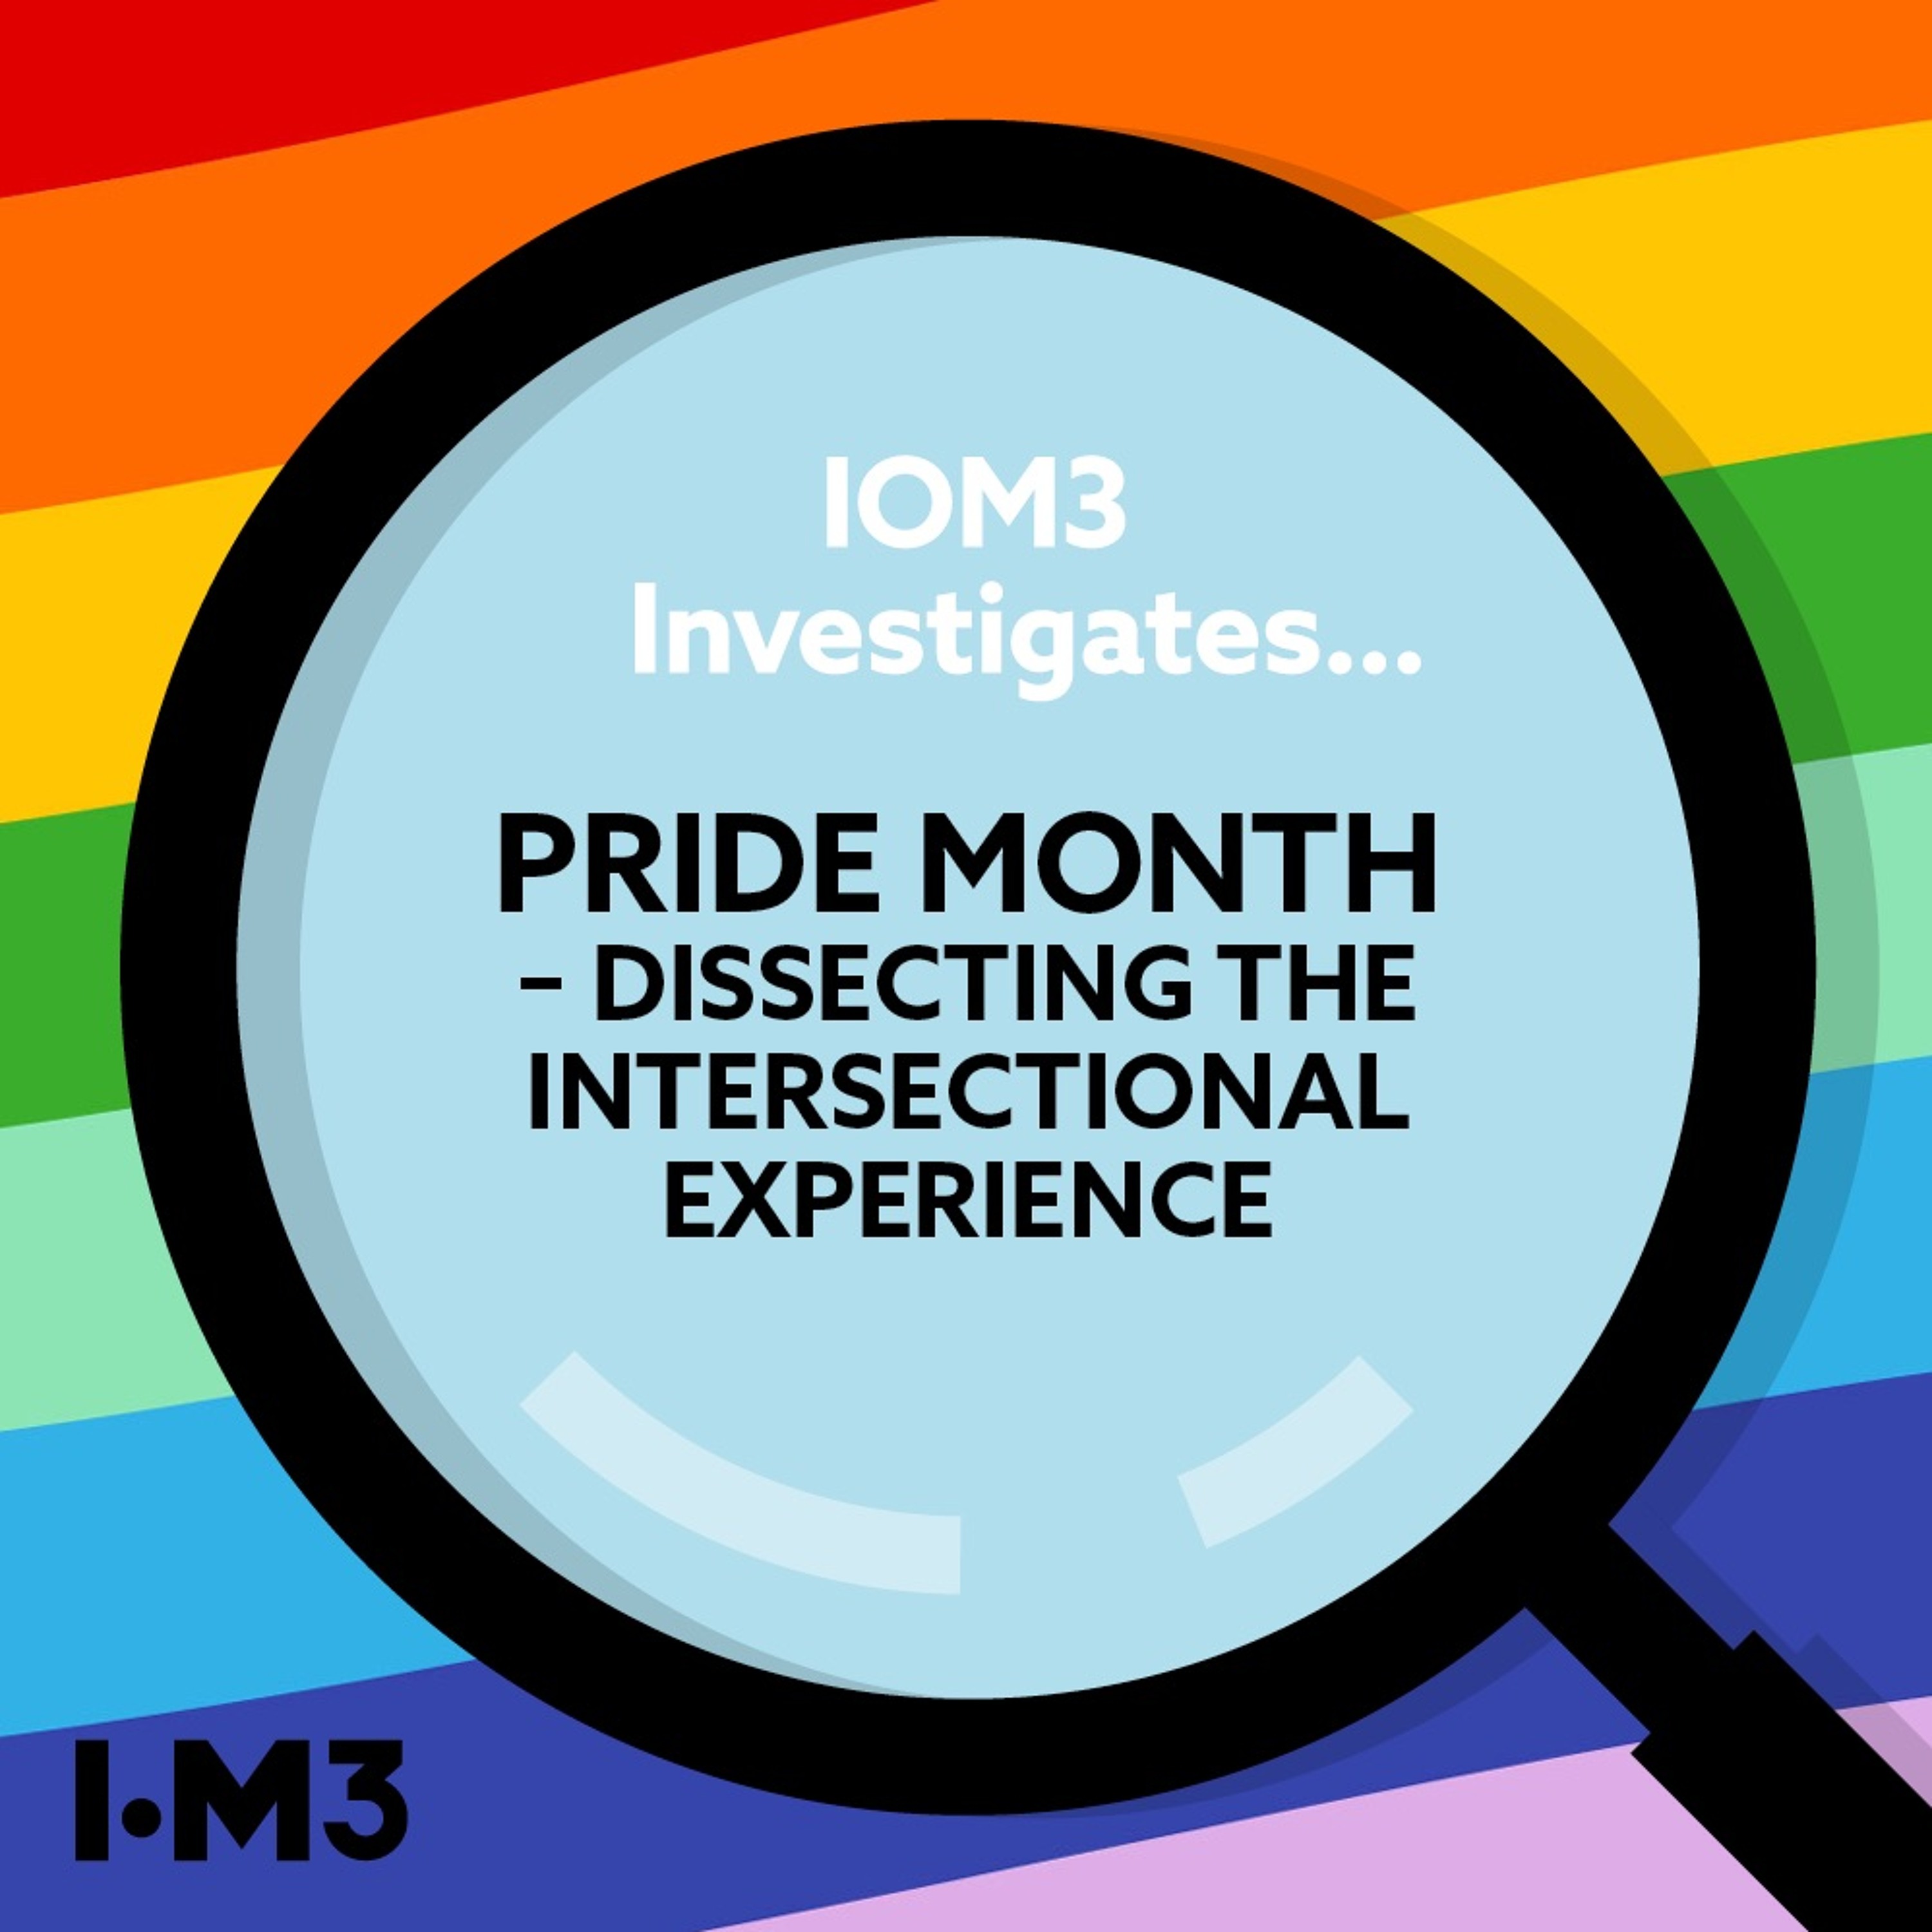 IOM3 Investigates... Pride month – dissecting the intersectional experience